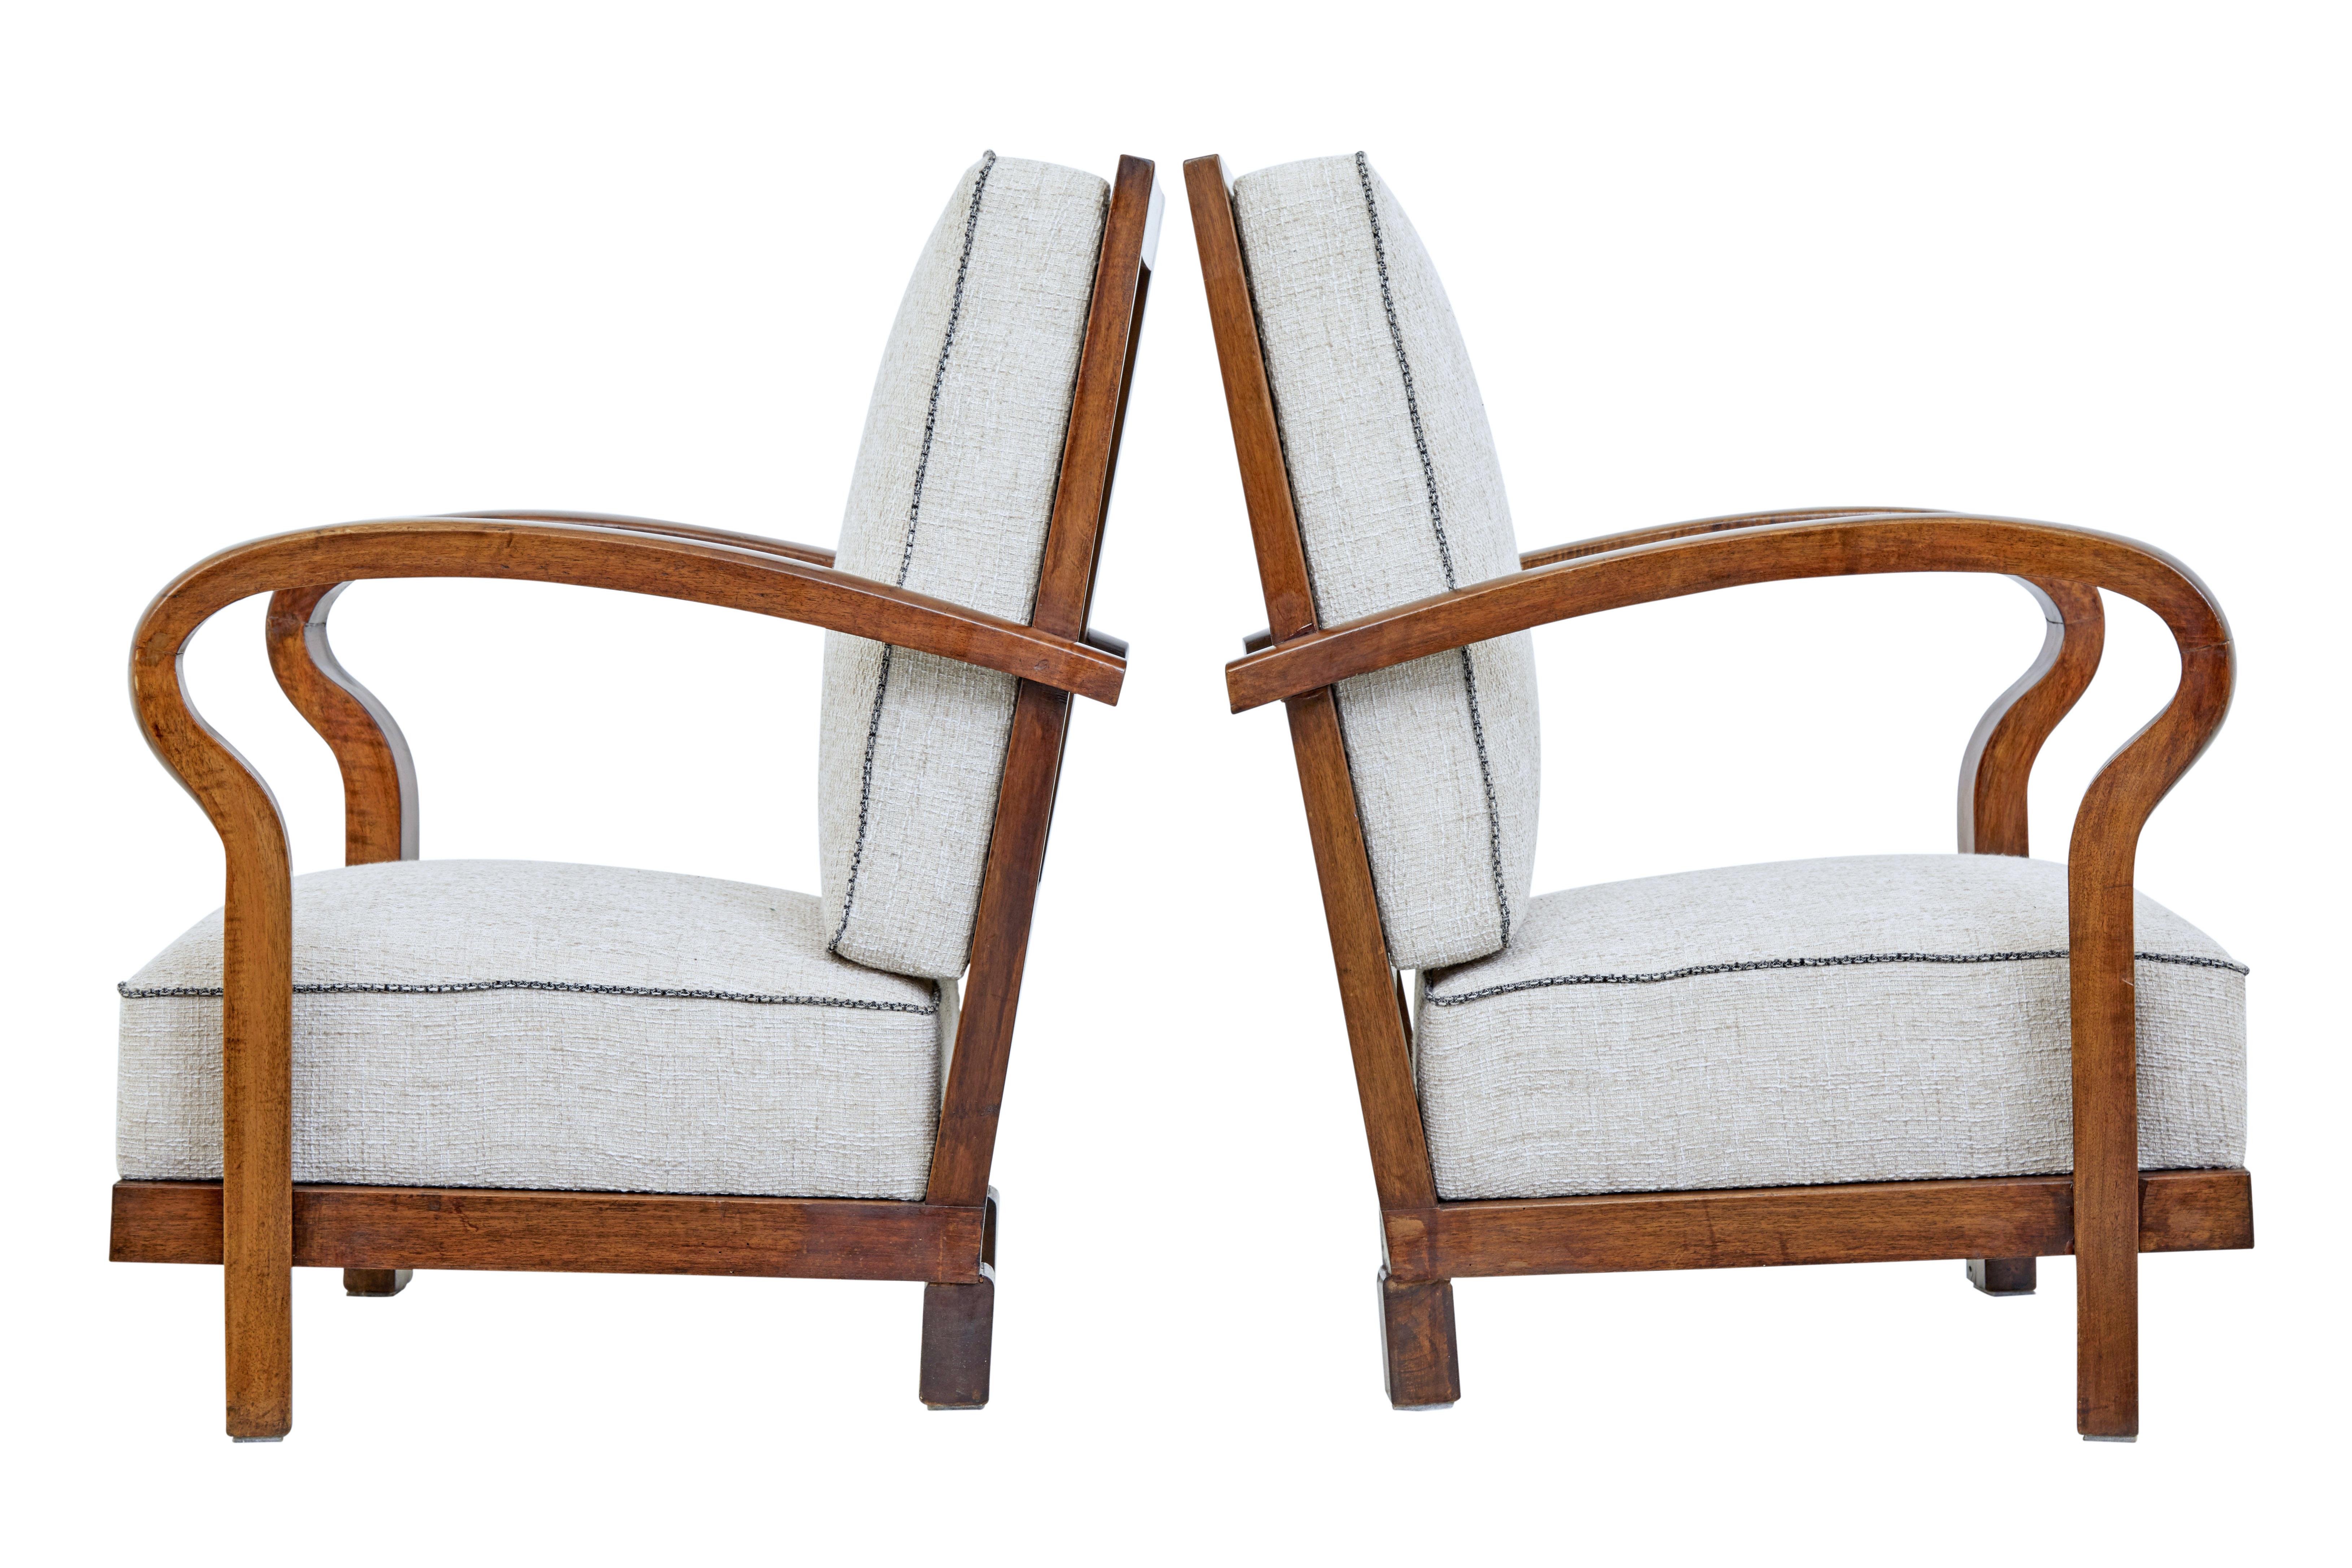 Pair of mid-20th century walnut open frame lounge chairs, circa 1960.

Good quality pair of Scandinavian Art Deco inspired lounge chairs. Beautifully shaped flowing arms that link from the backrest to the base.

Standing on short block